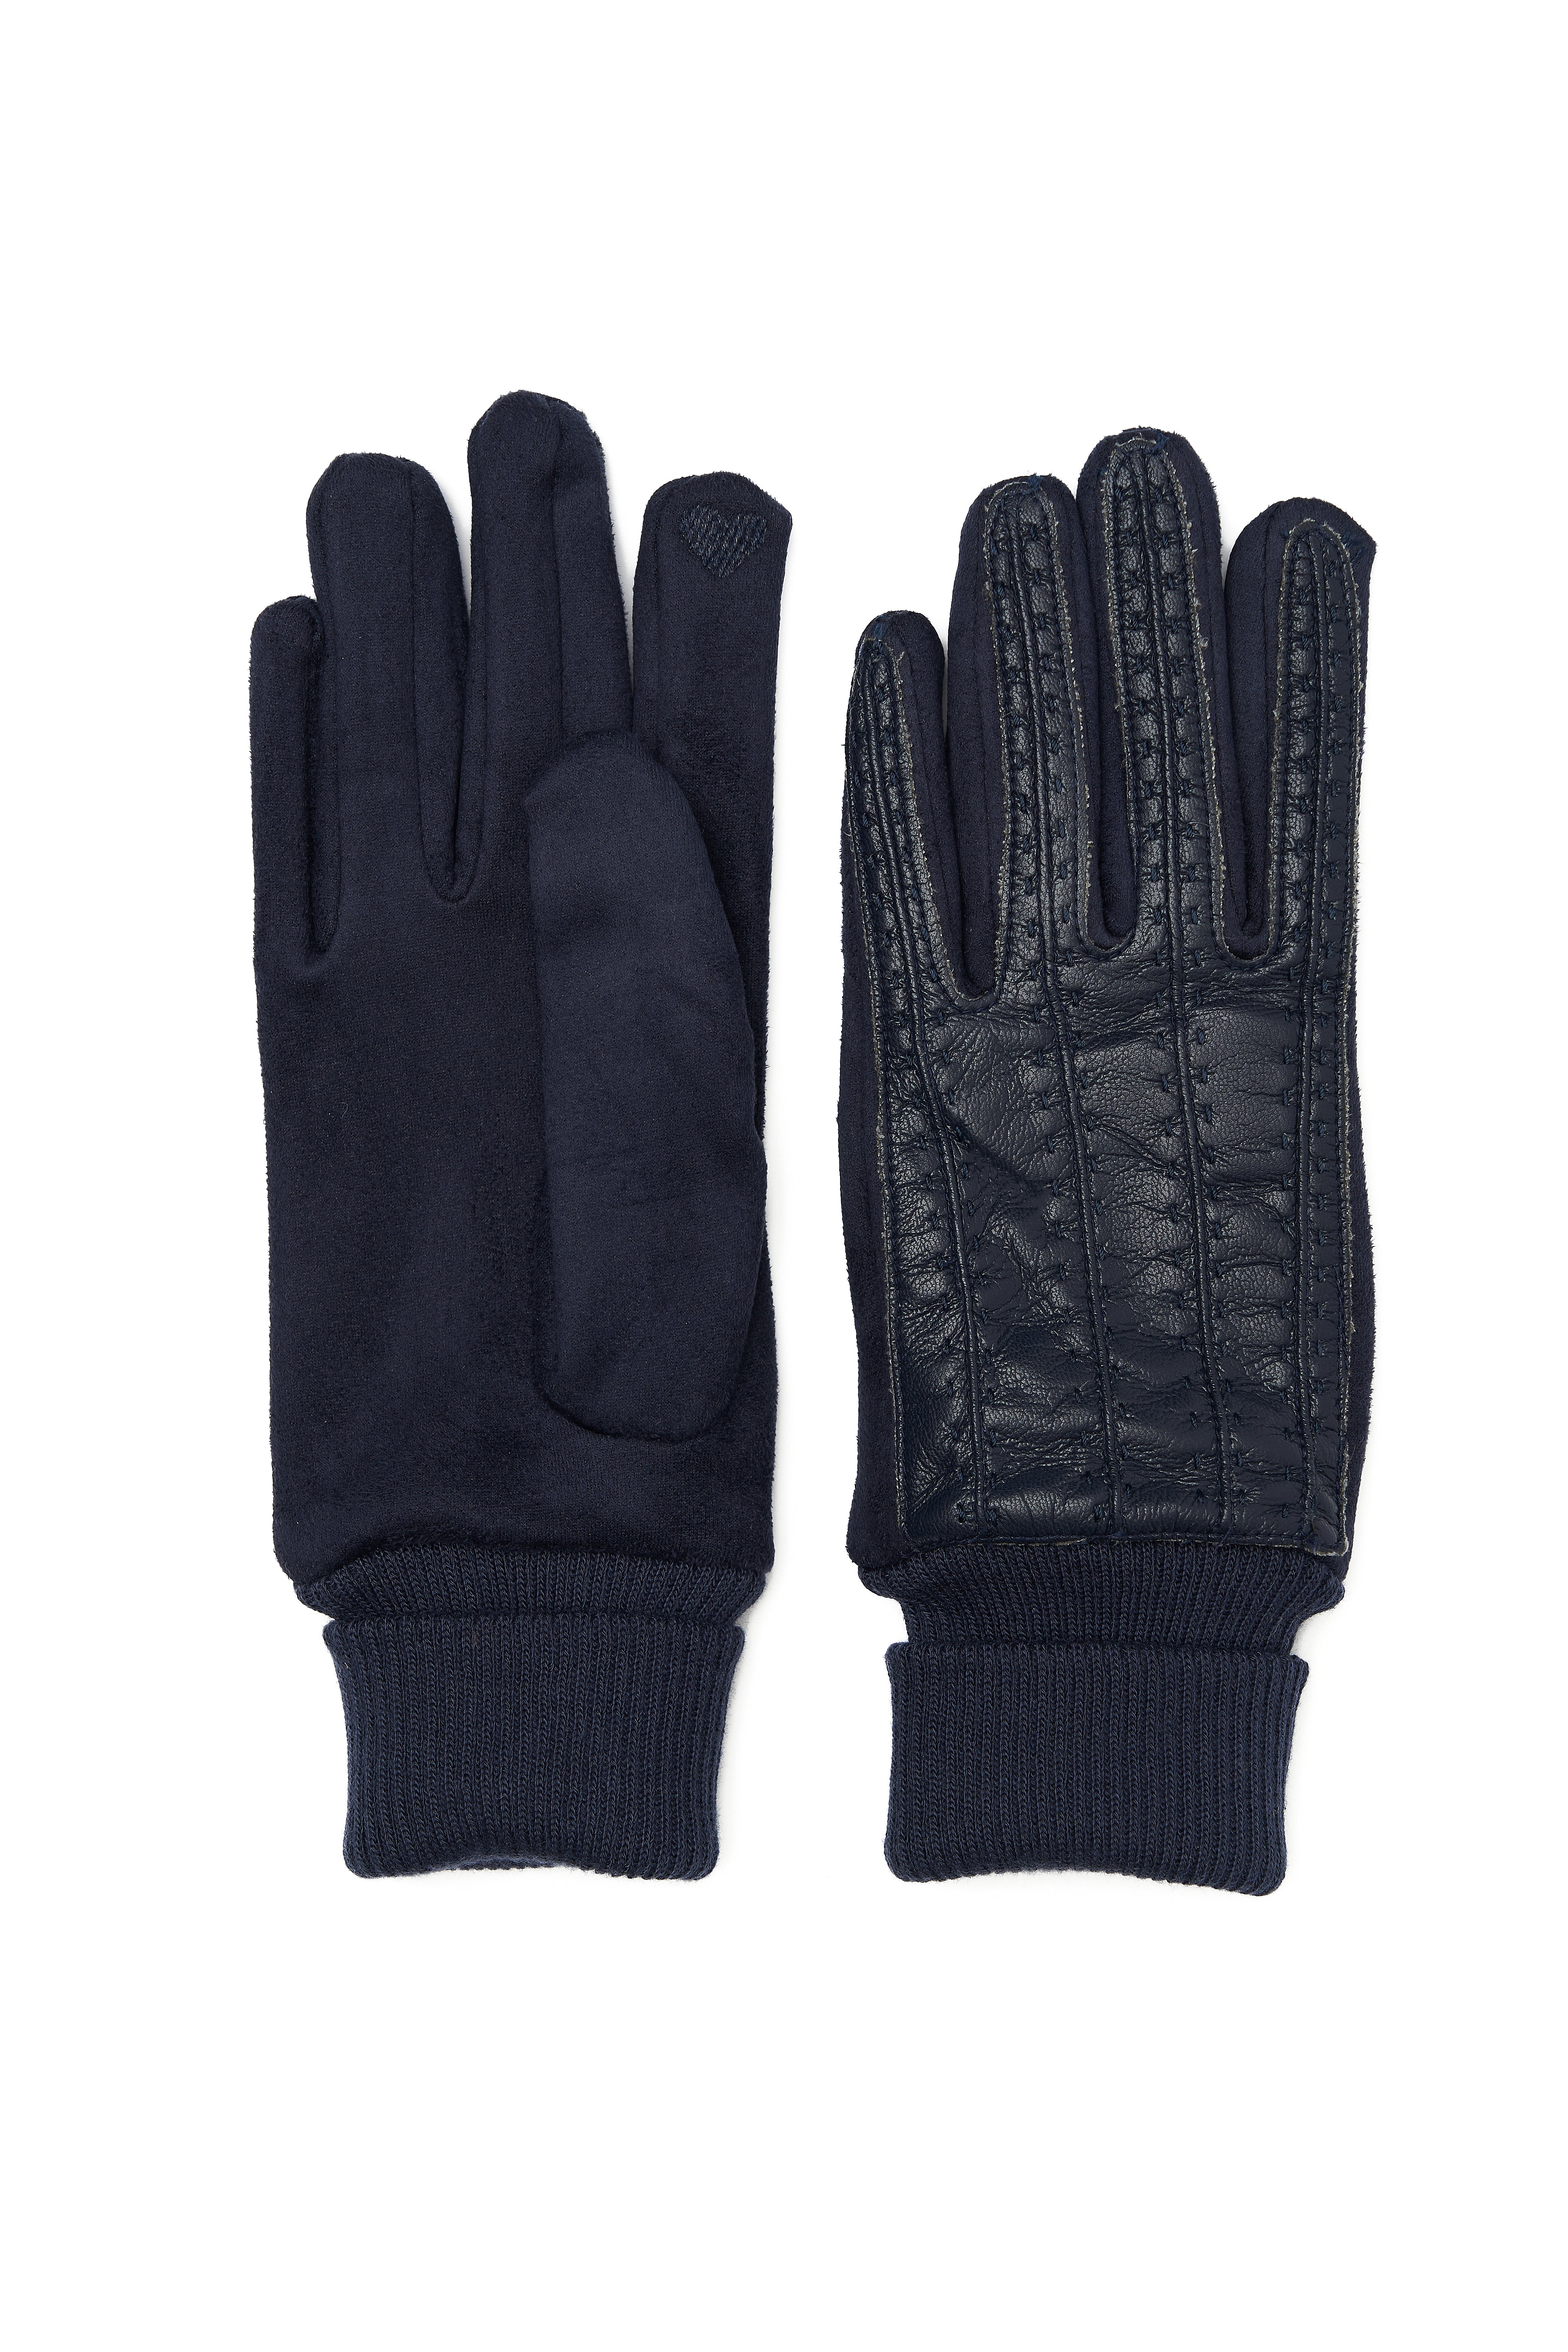 ECO LEATHER BLUE GLOVES